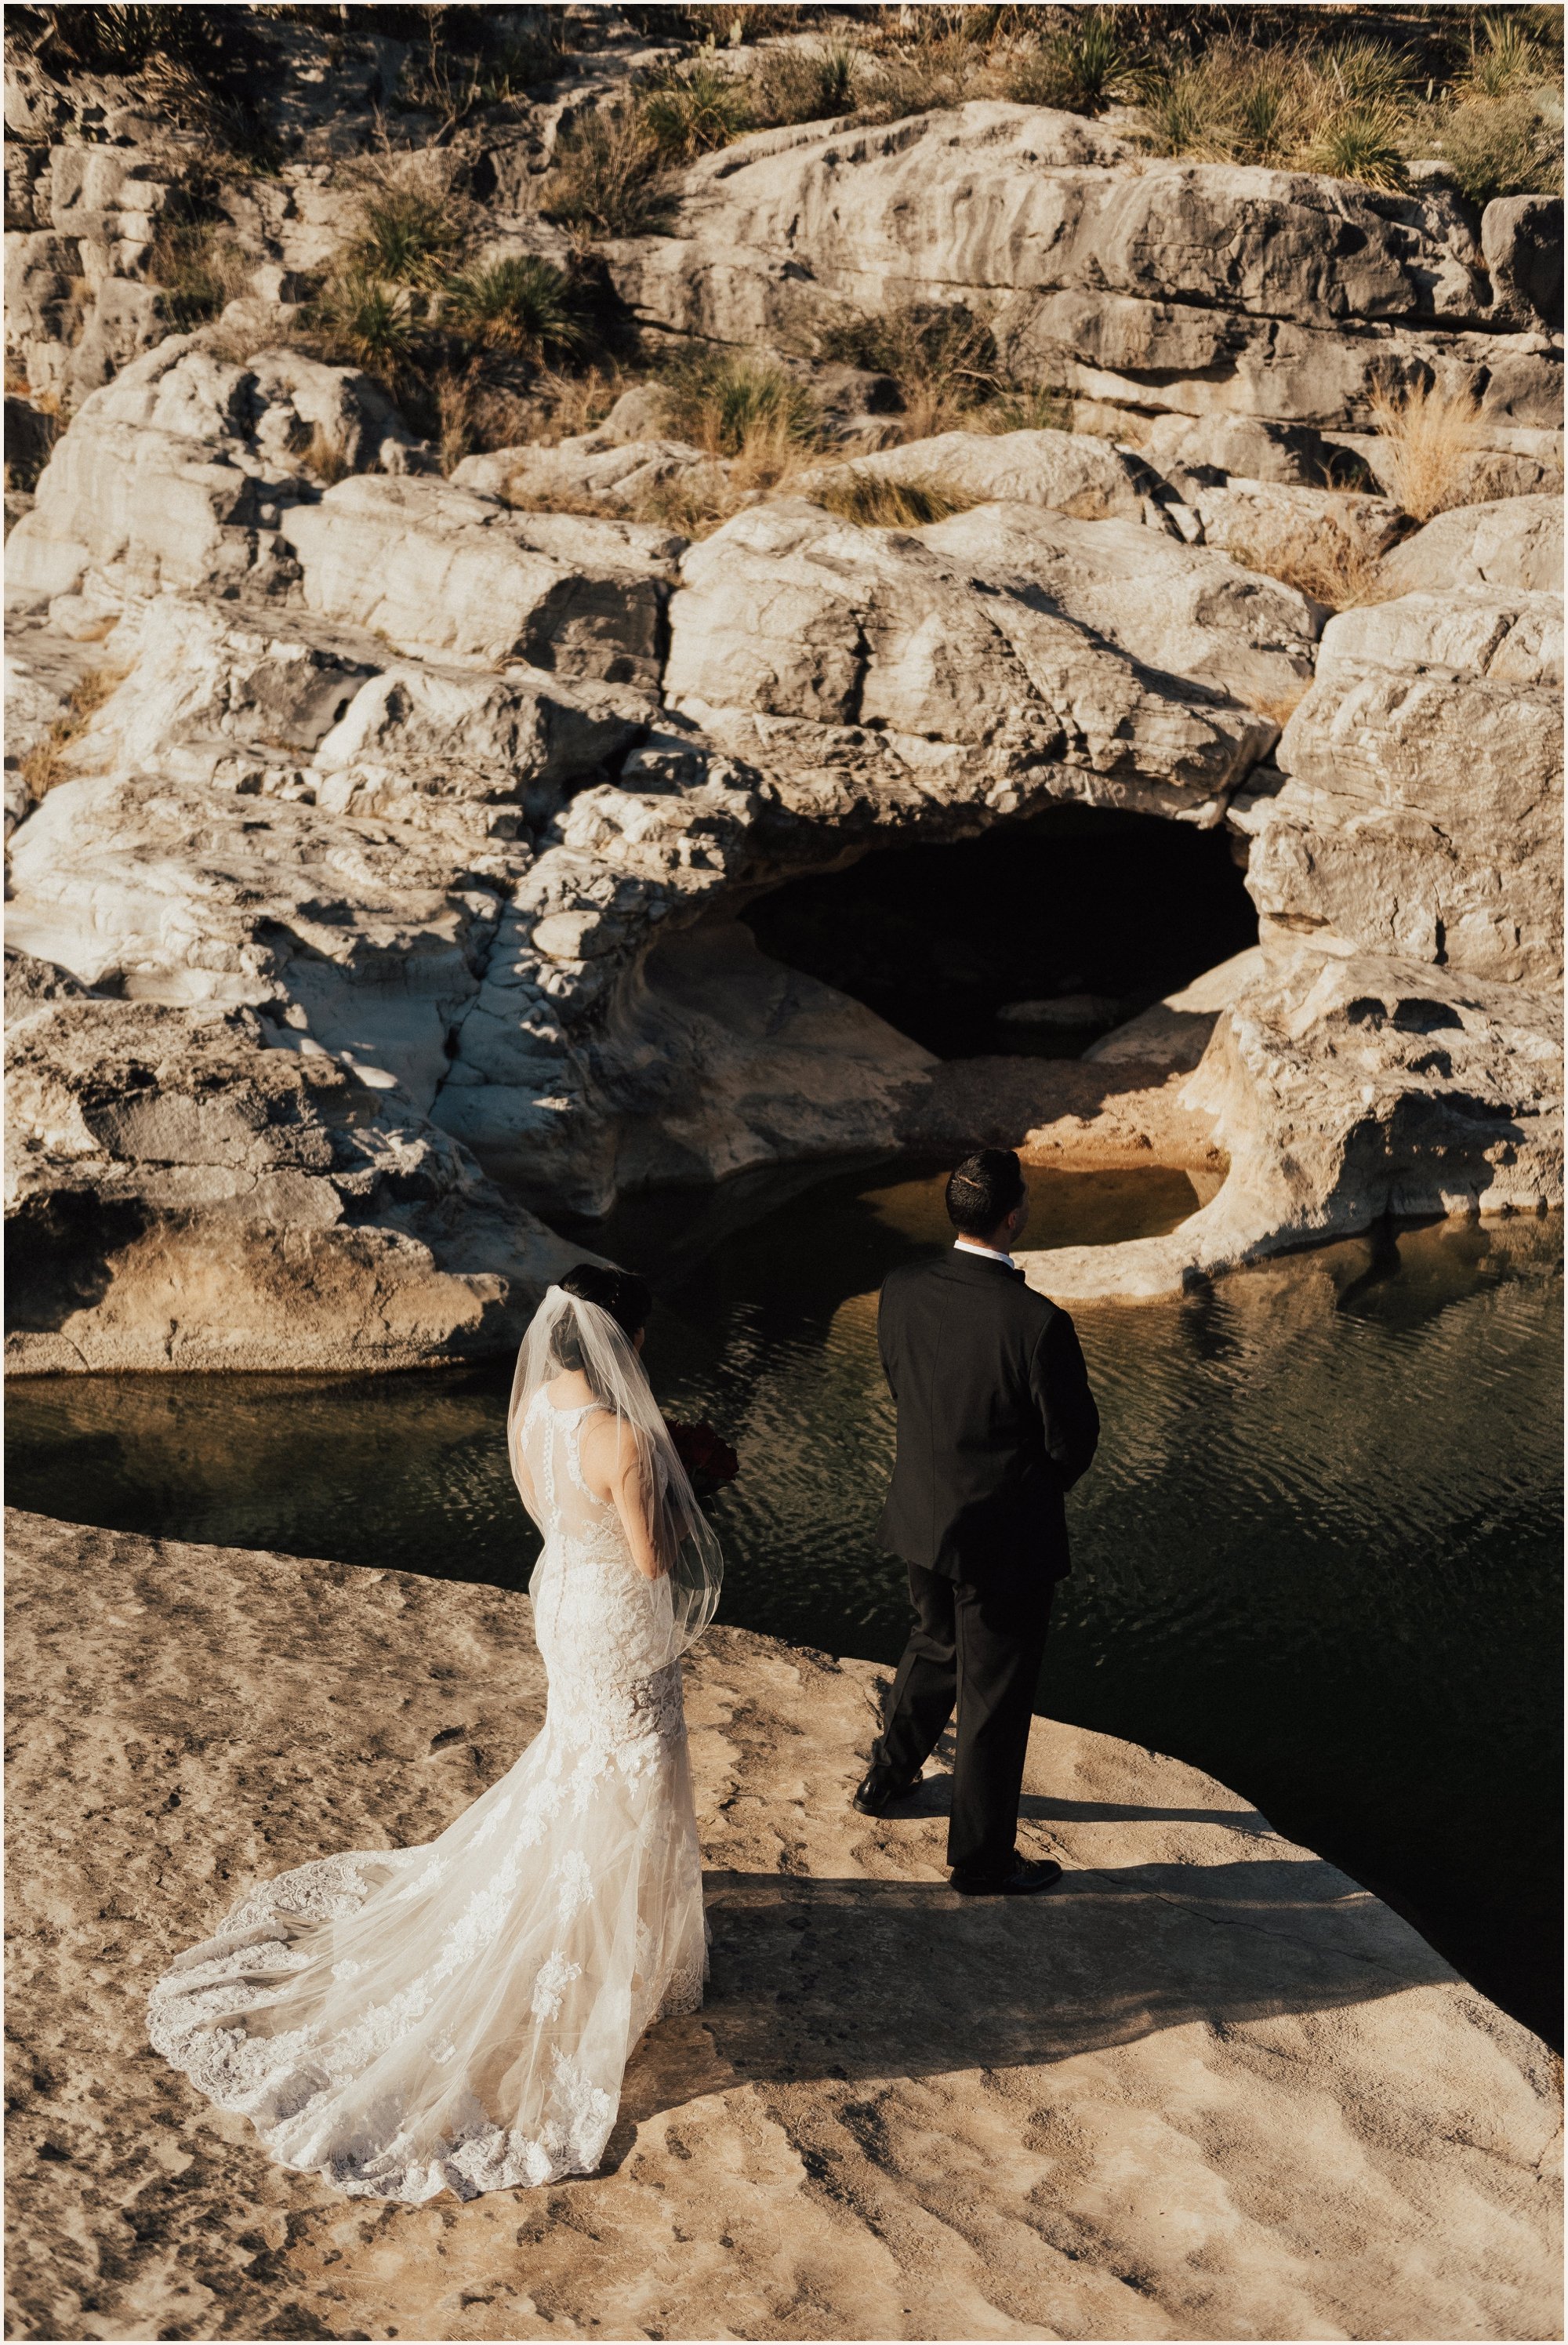 First Look at Pedernales Falls State Park in Texas | Lauren Parr Photography | Austin Based Wedding Photographer